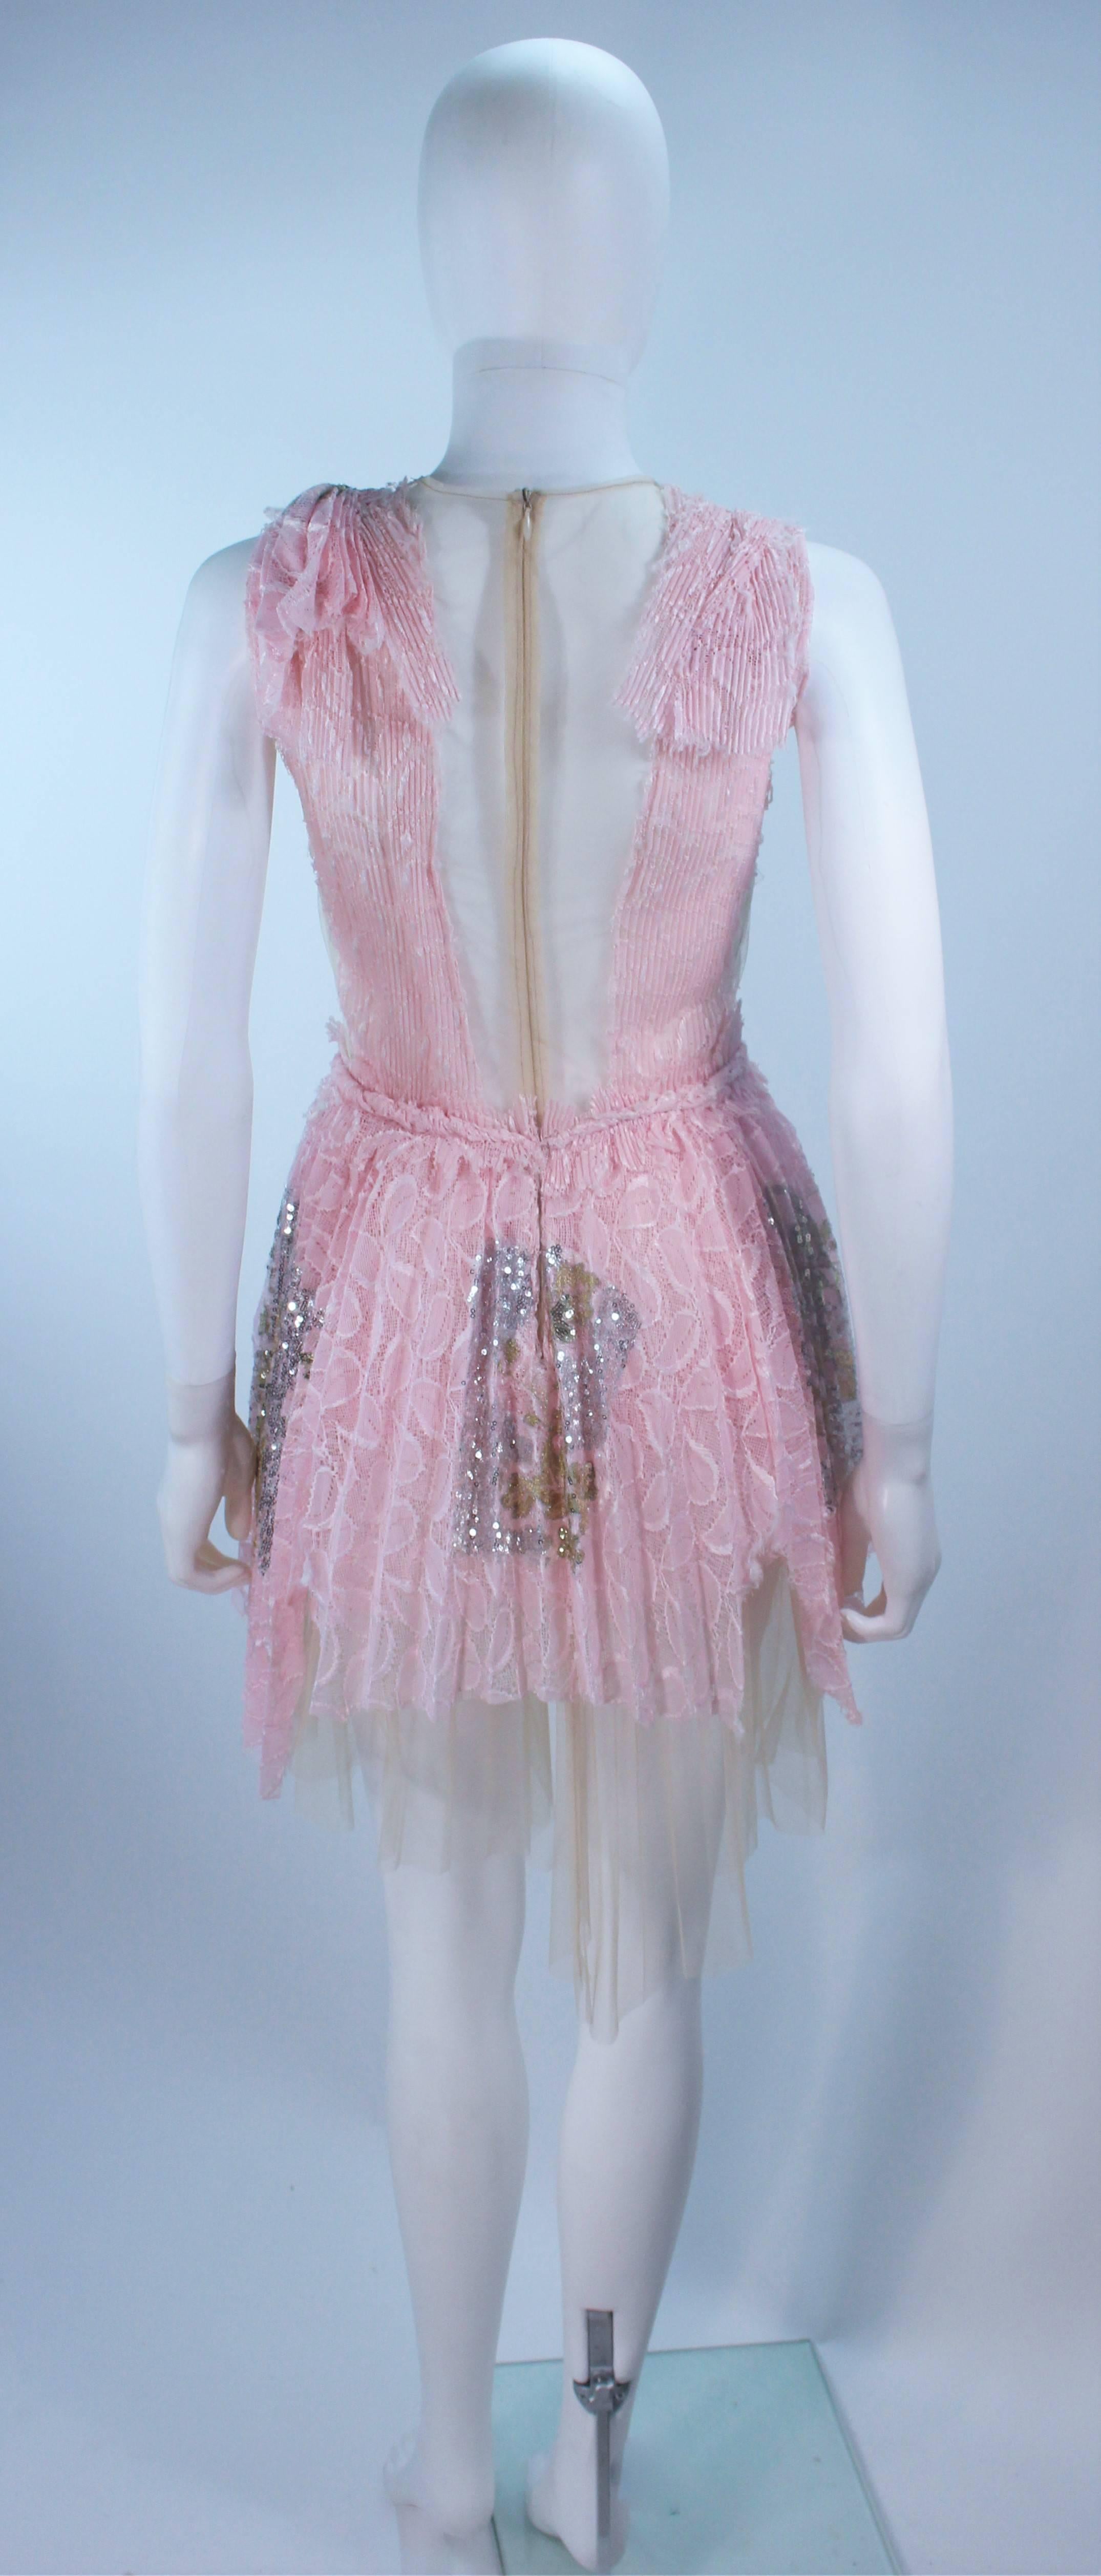 MORALES Sheer Pink Applique Cocktail Dress with Sequins Size 2 For Sale 4